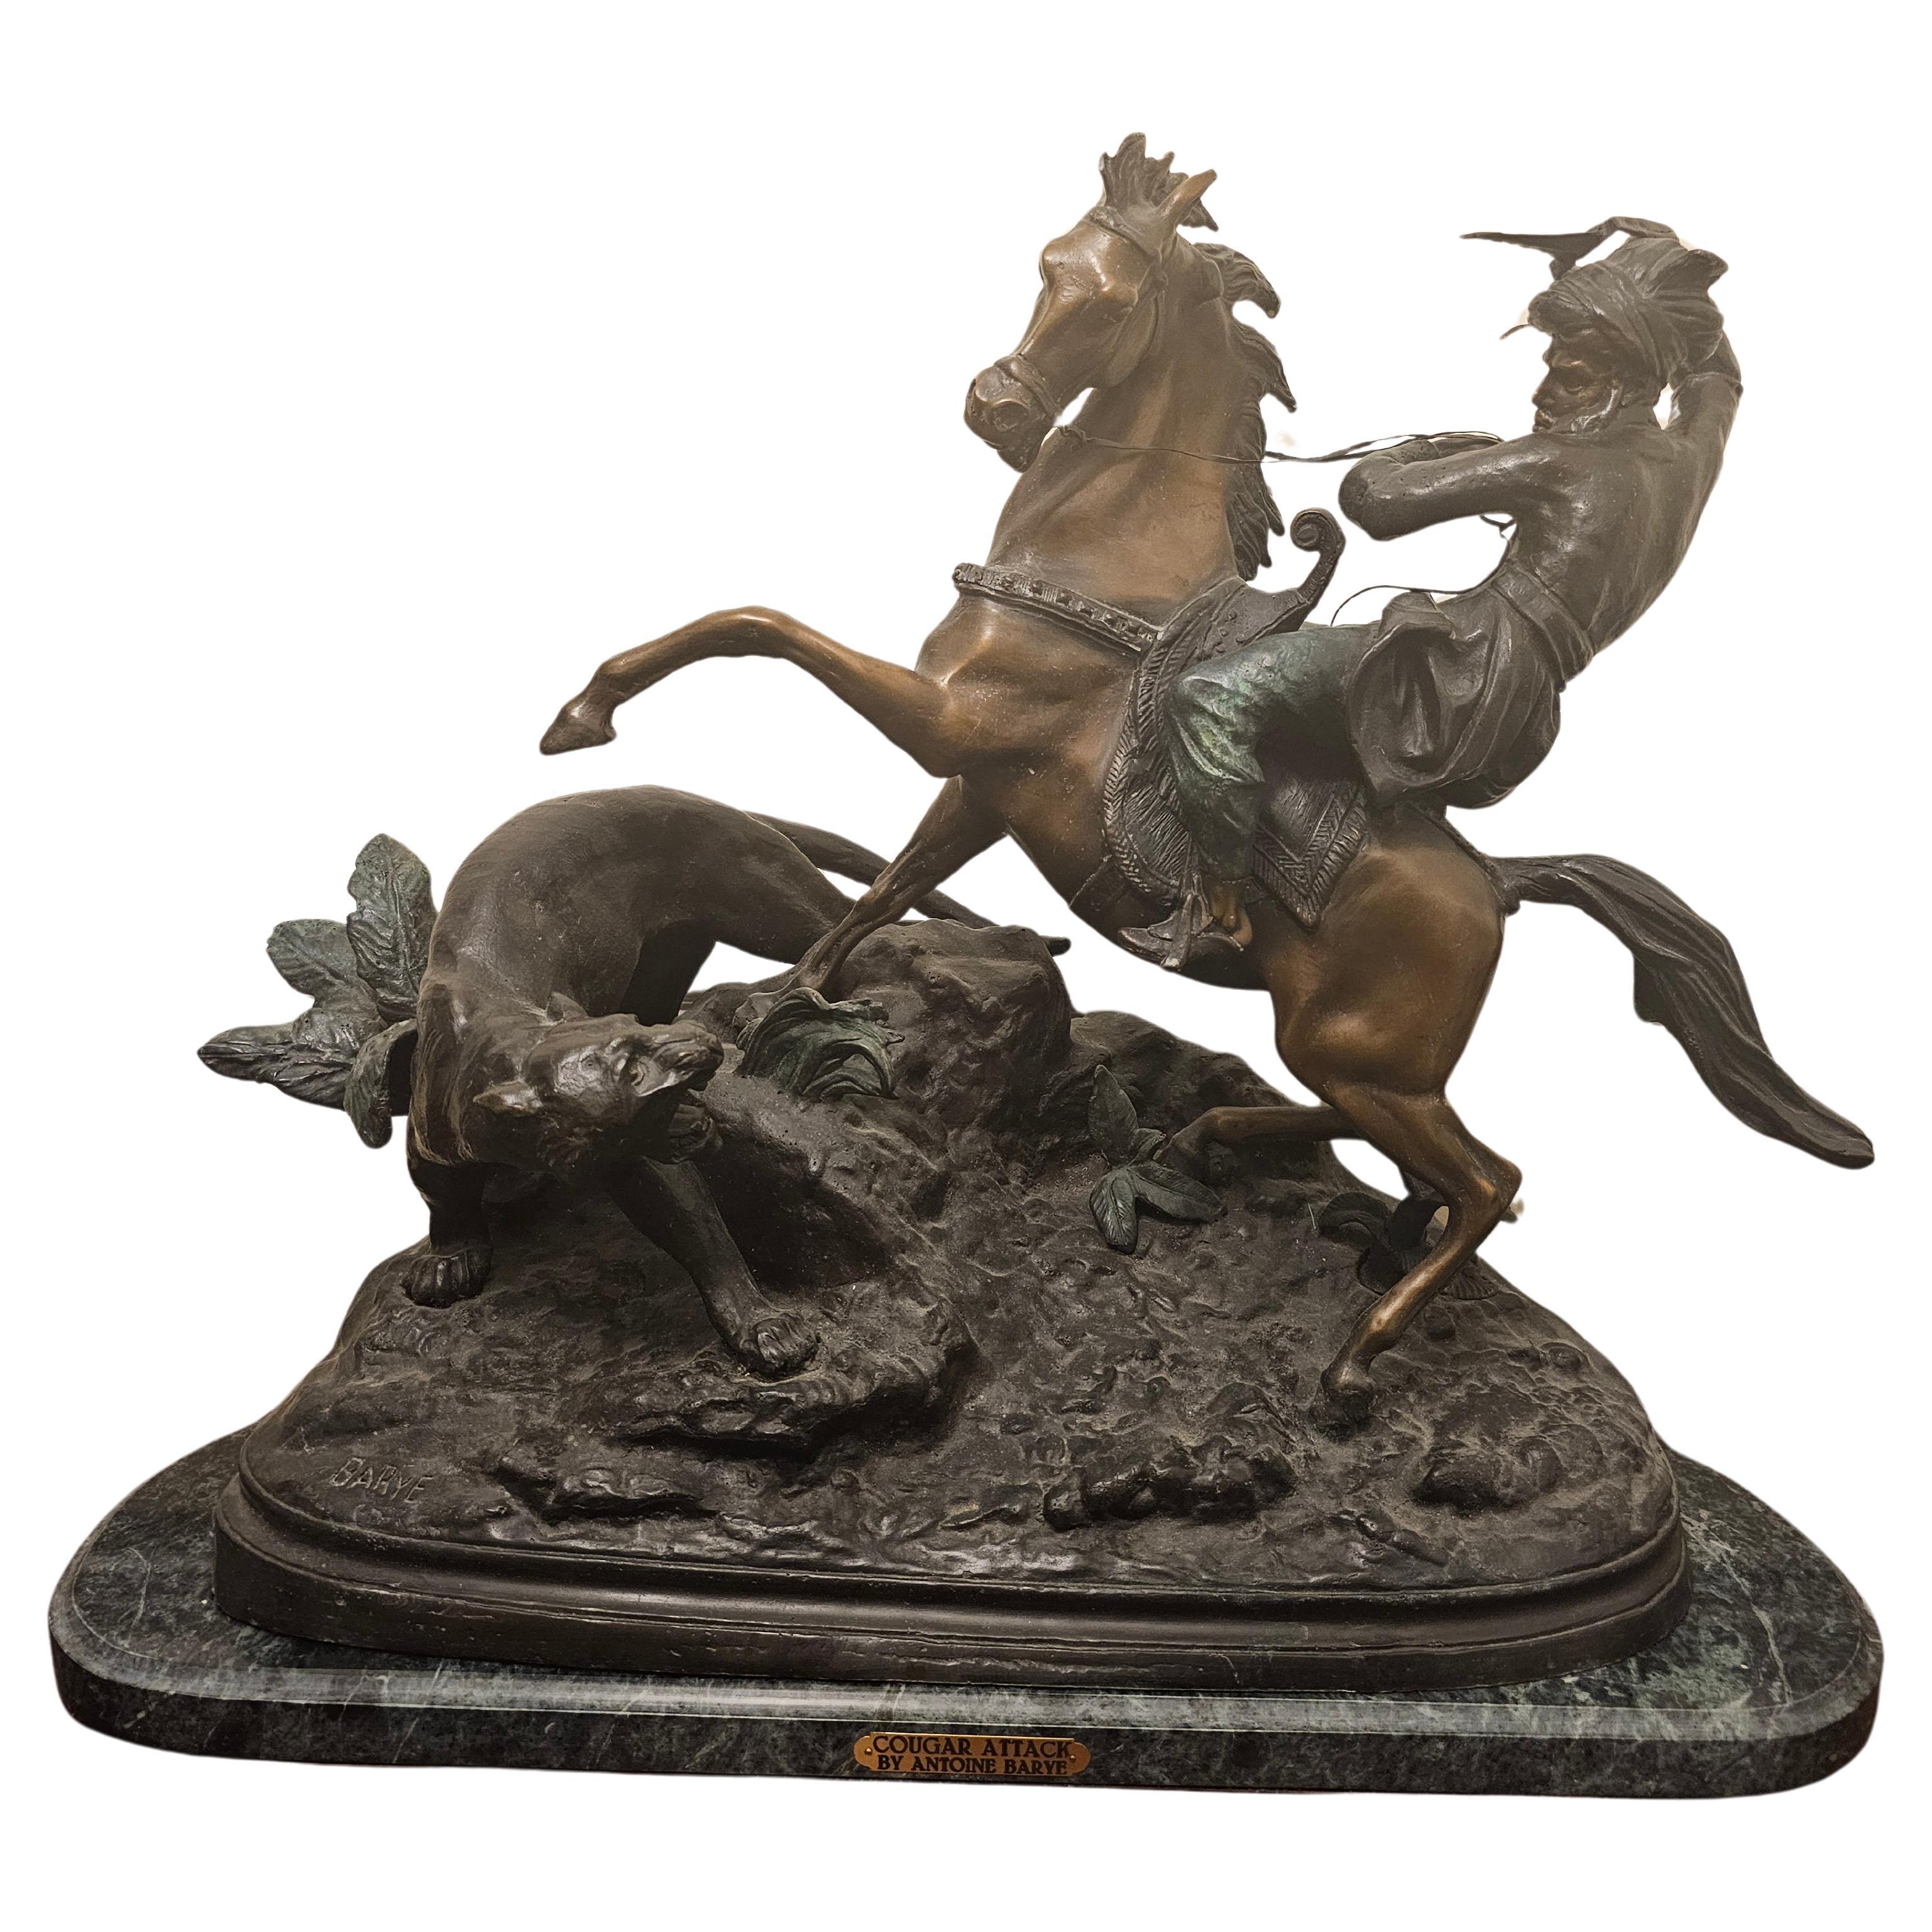 Antoine-Louis Barye (French 1796 - 1875), Cougar Attack, Recast Bronze on Marble For Sale